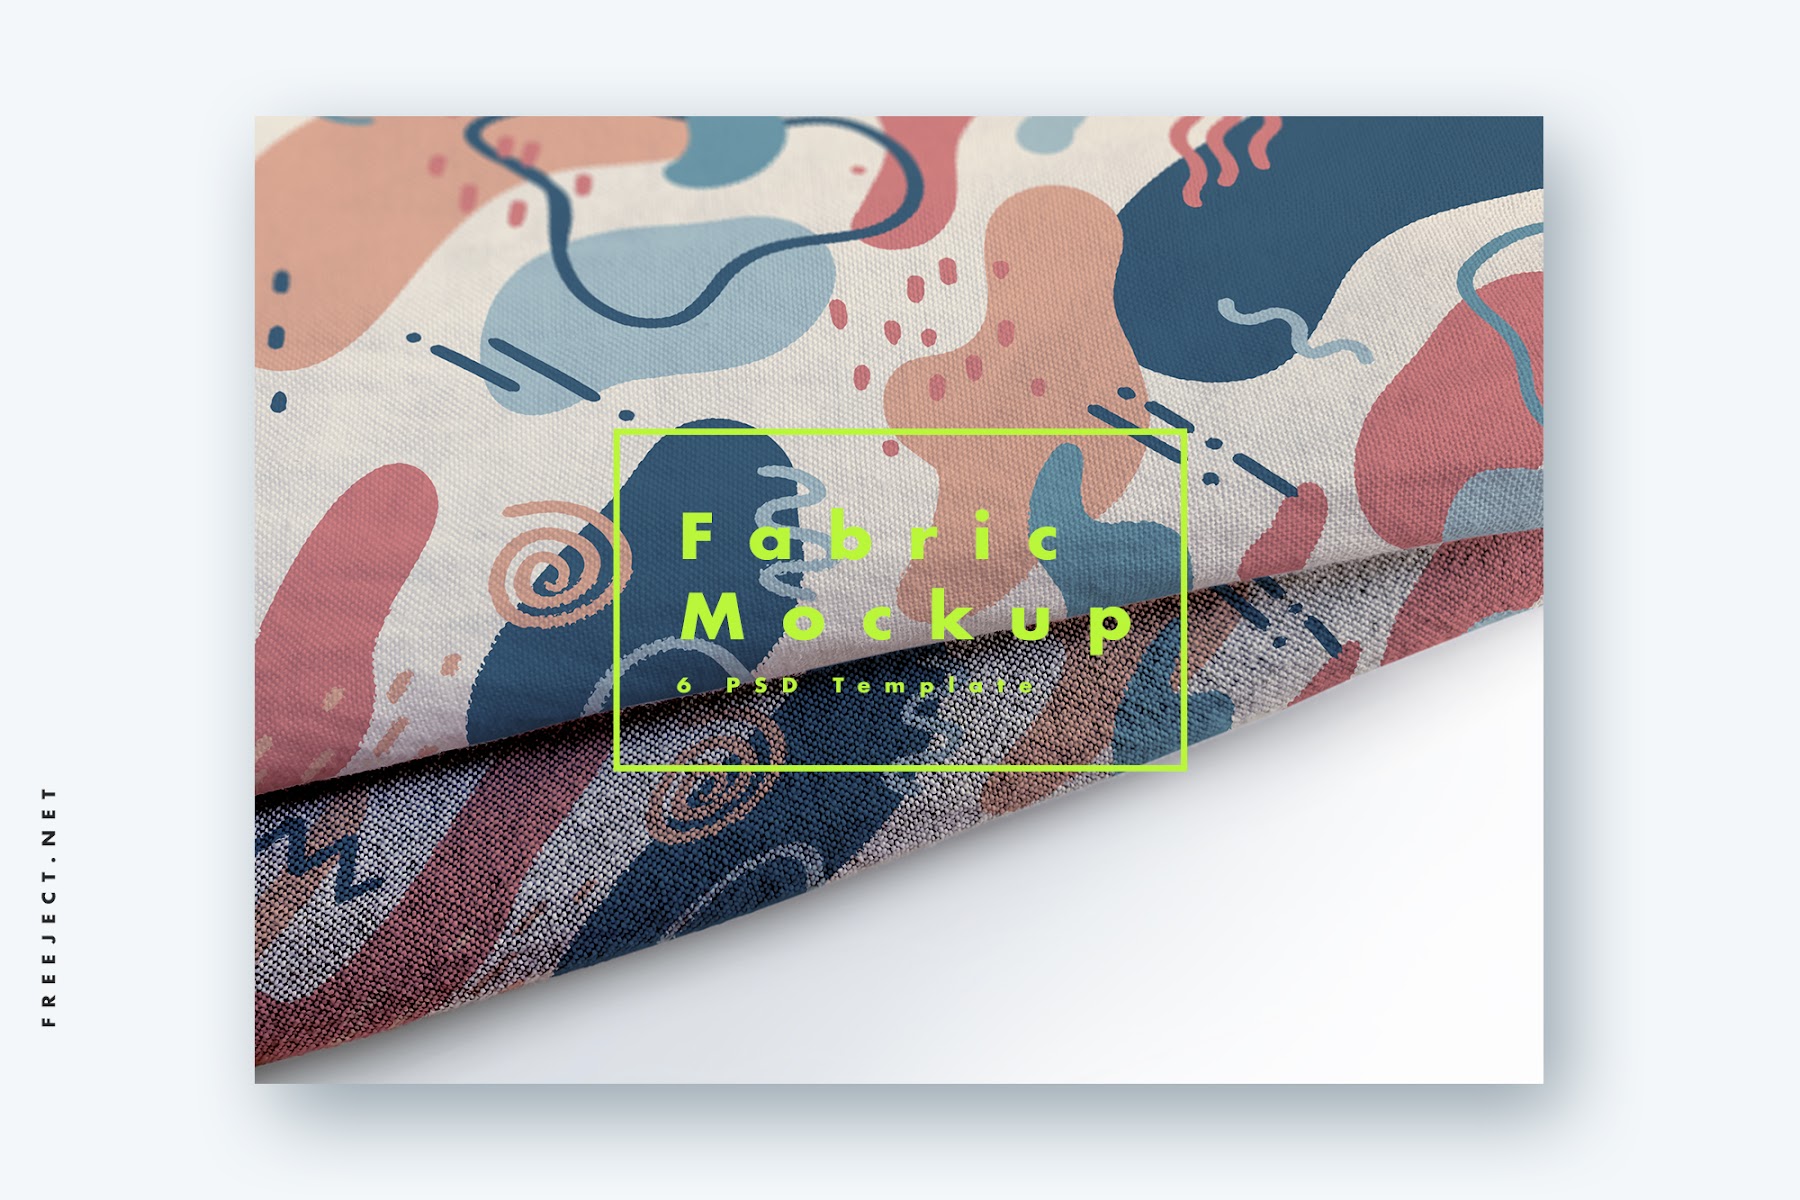 Download Free 232+ Fabric Free Mockup Yellowimages Mockups for Cricut, Silhouette and Other Machine